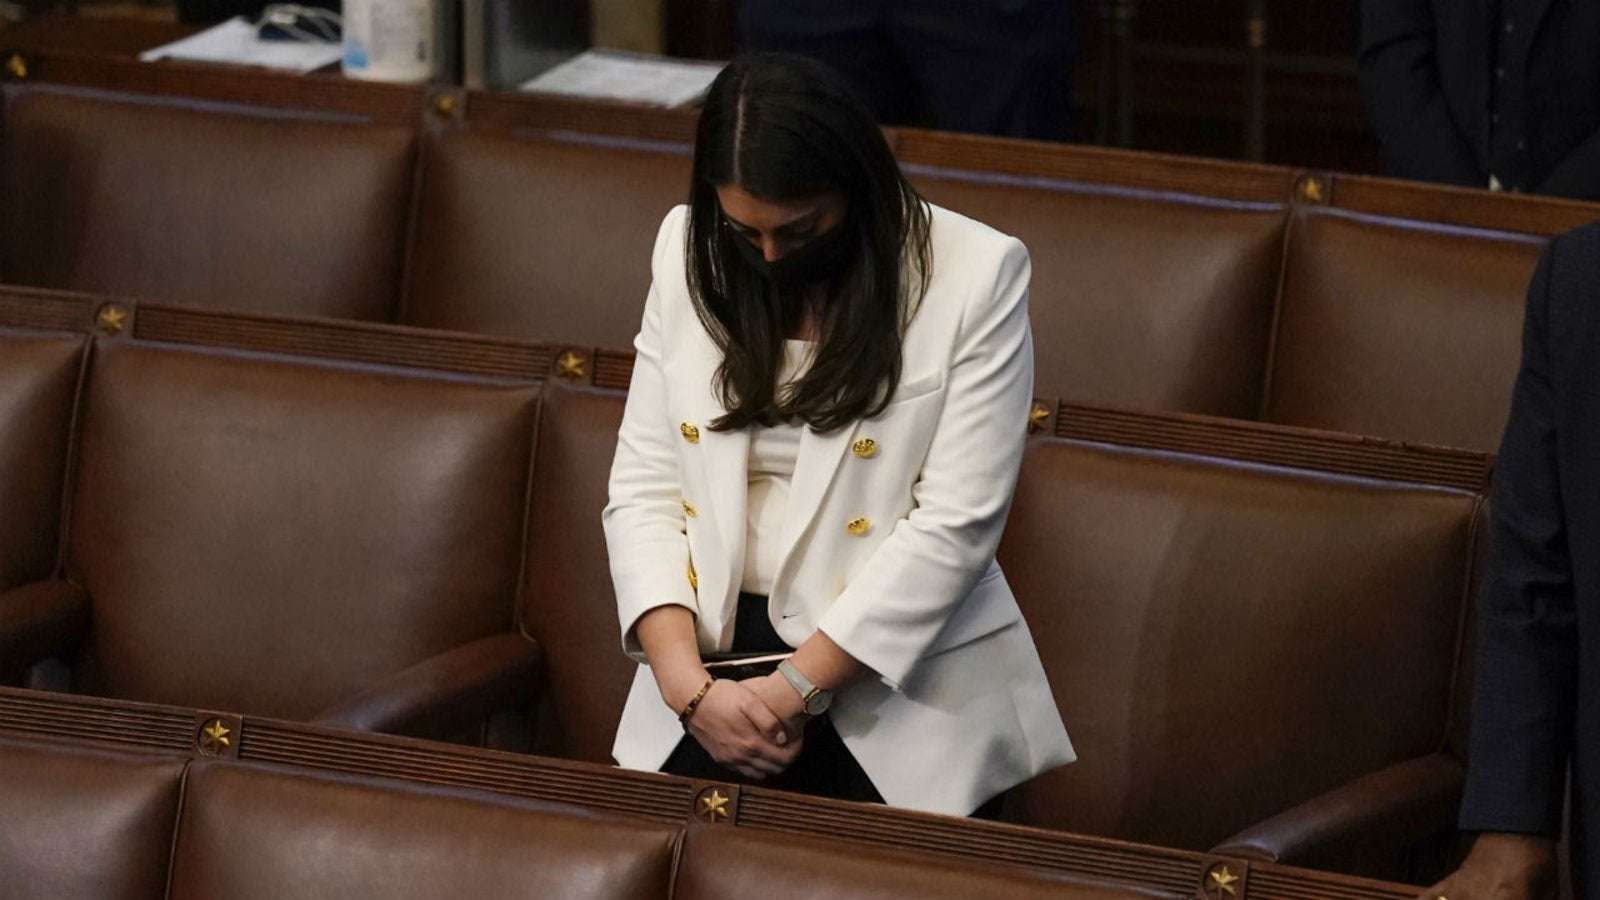 image for Alexandria Ocasio-Cortez said she feared losing her life during Capitol siege, calls for Trump's removal